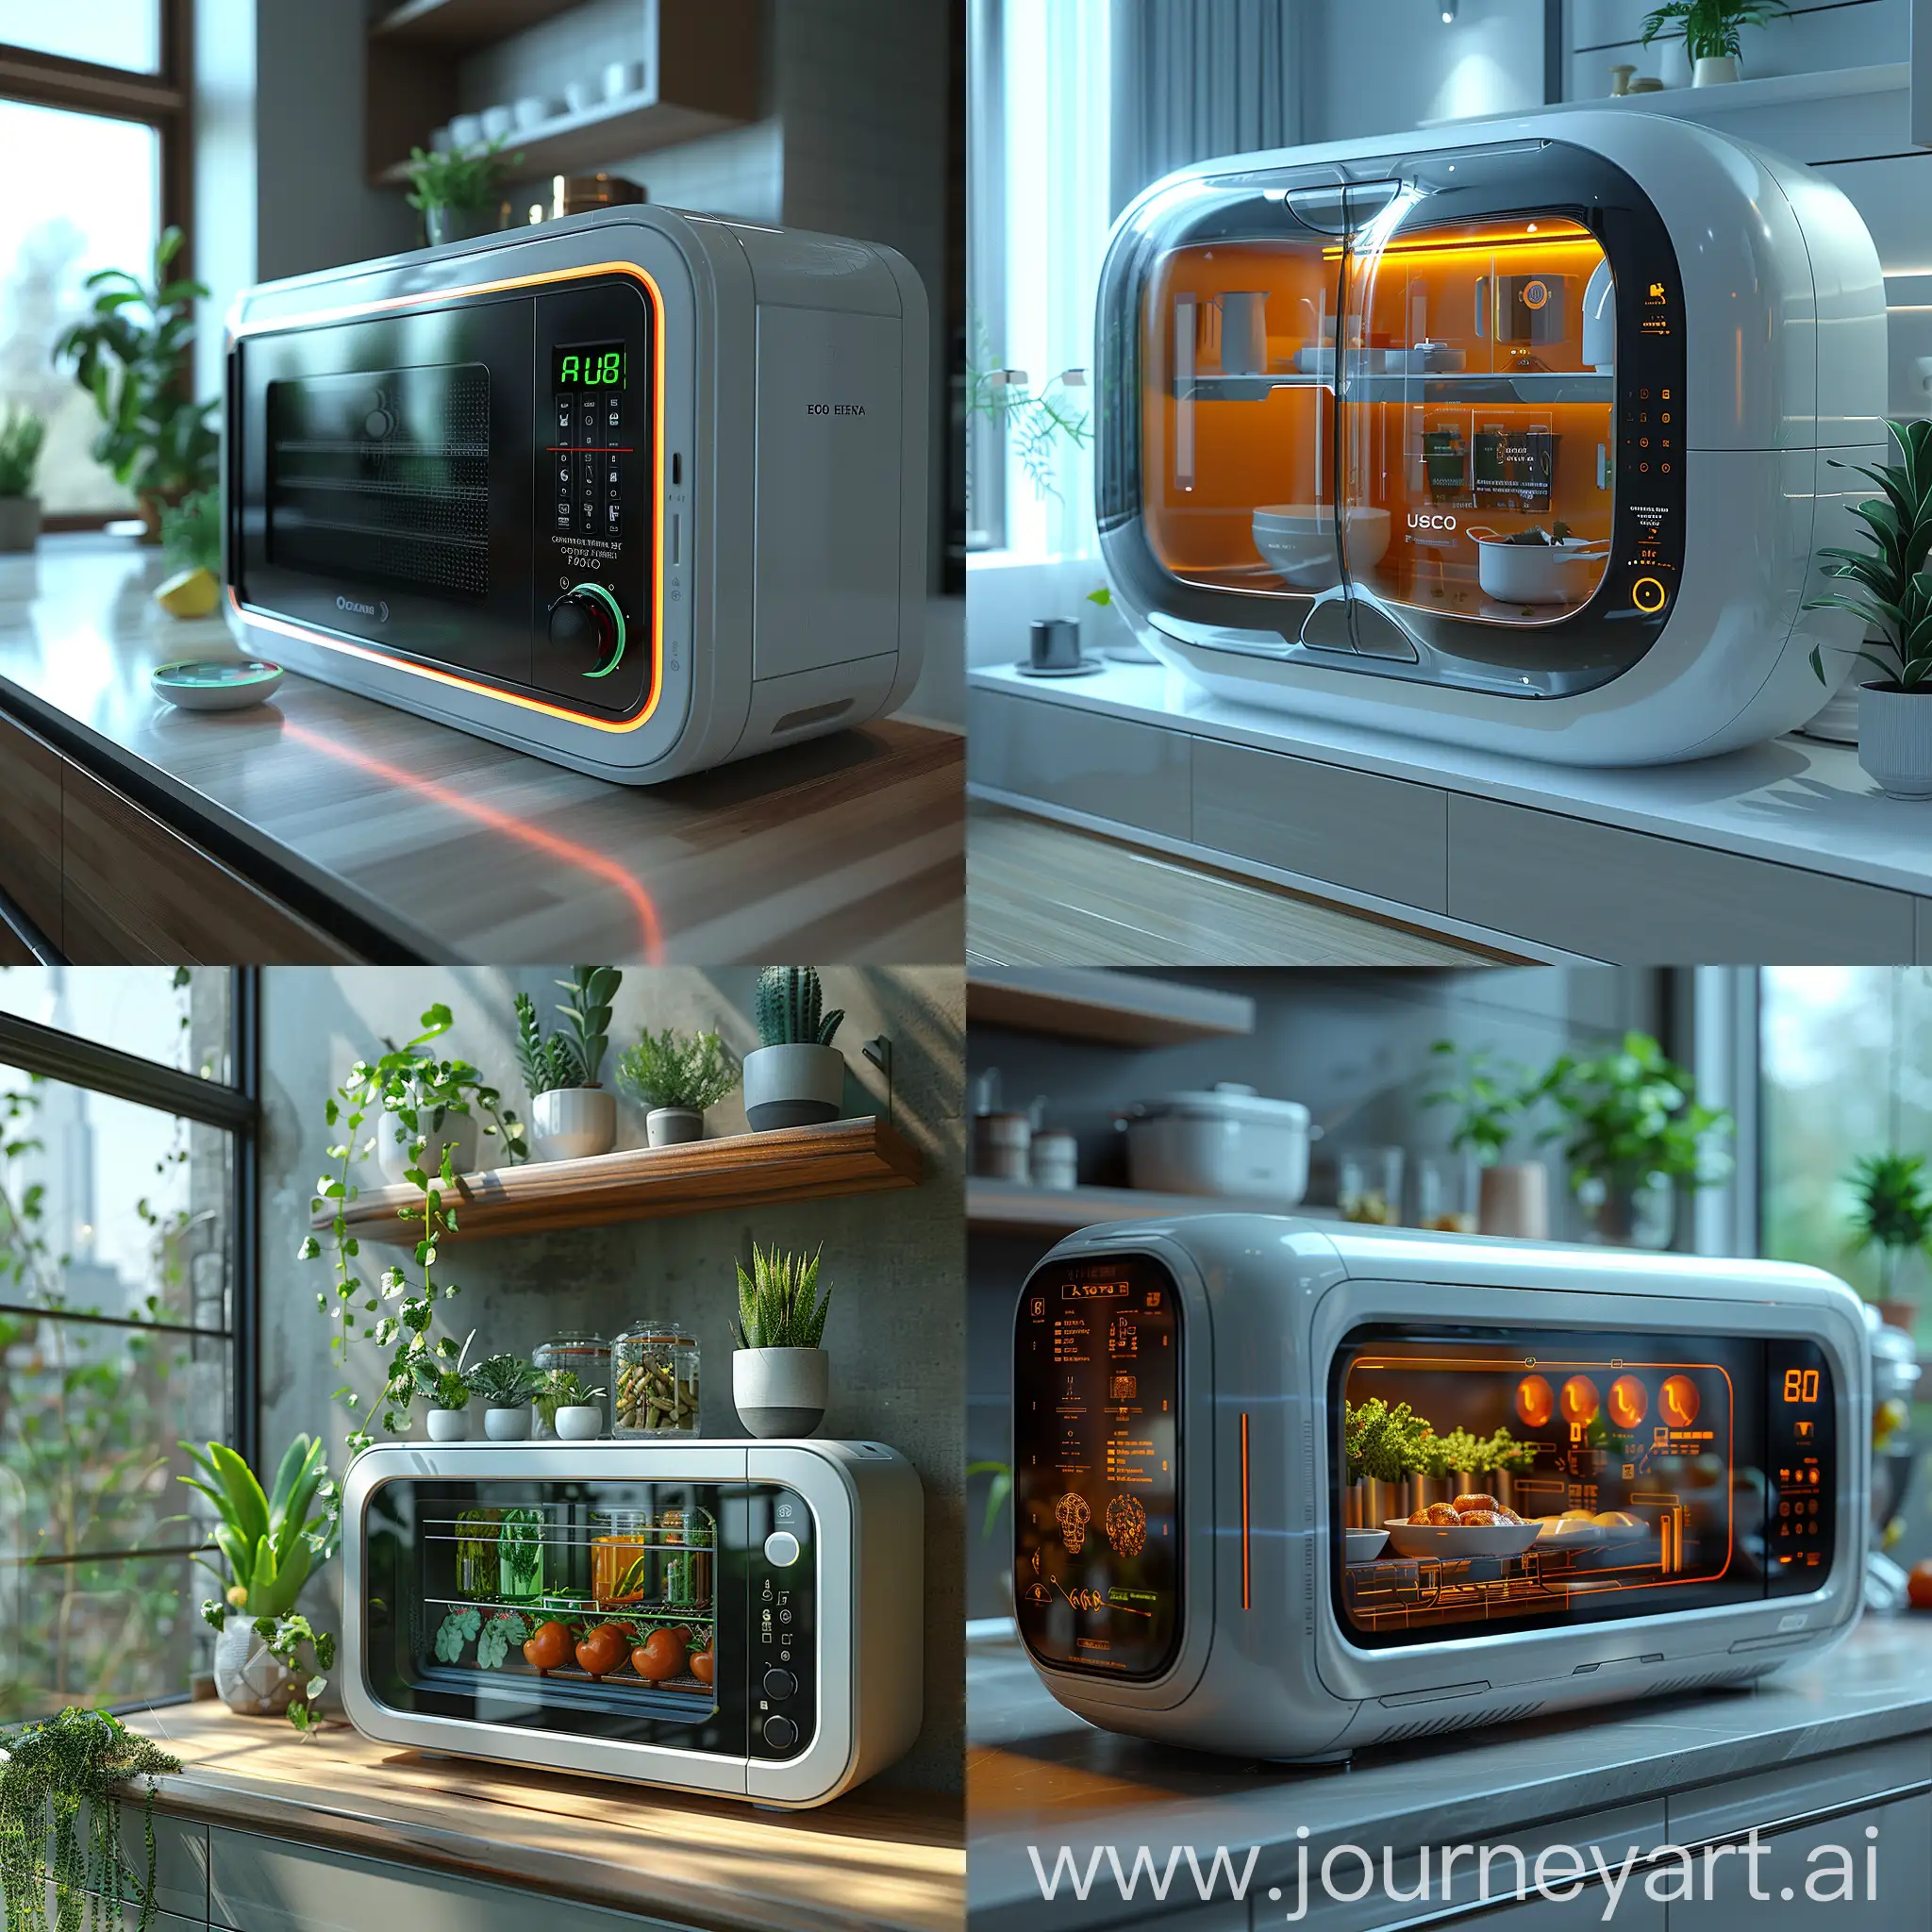 HighTech-Futuristic-Microwave-with-Zero-Energy-Consumption-and-EcoFriendly-Features